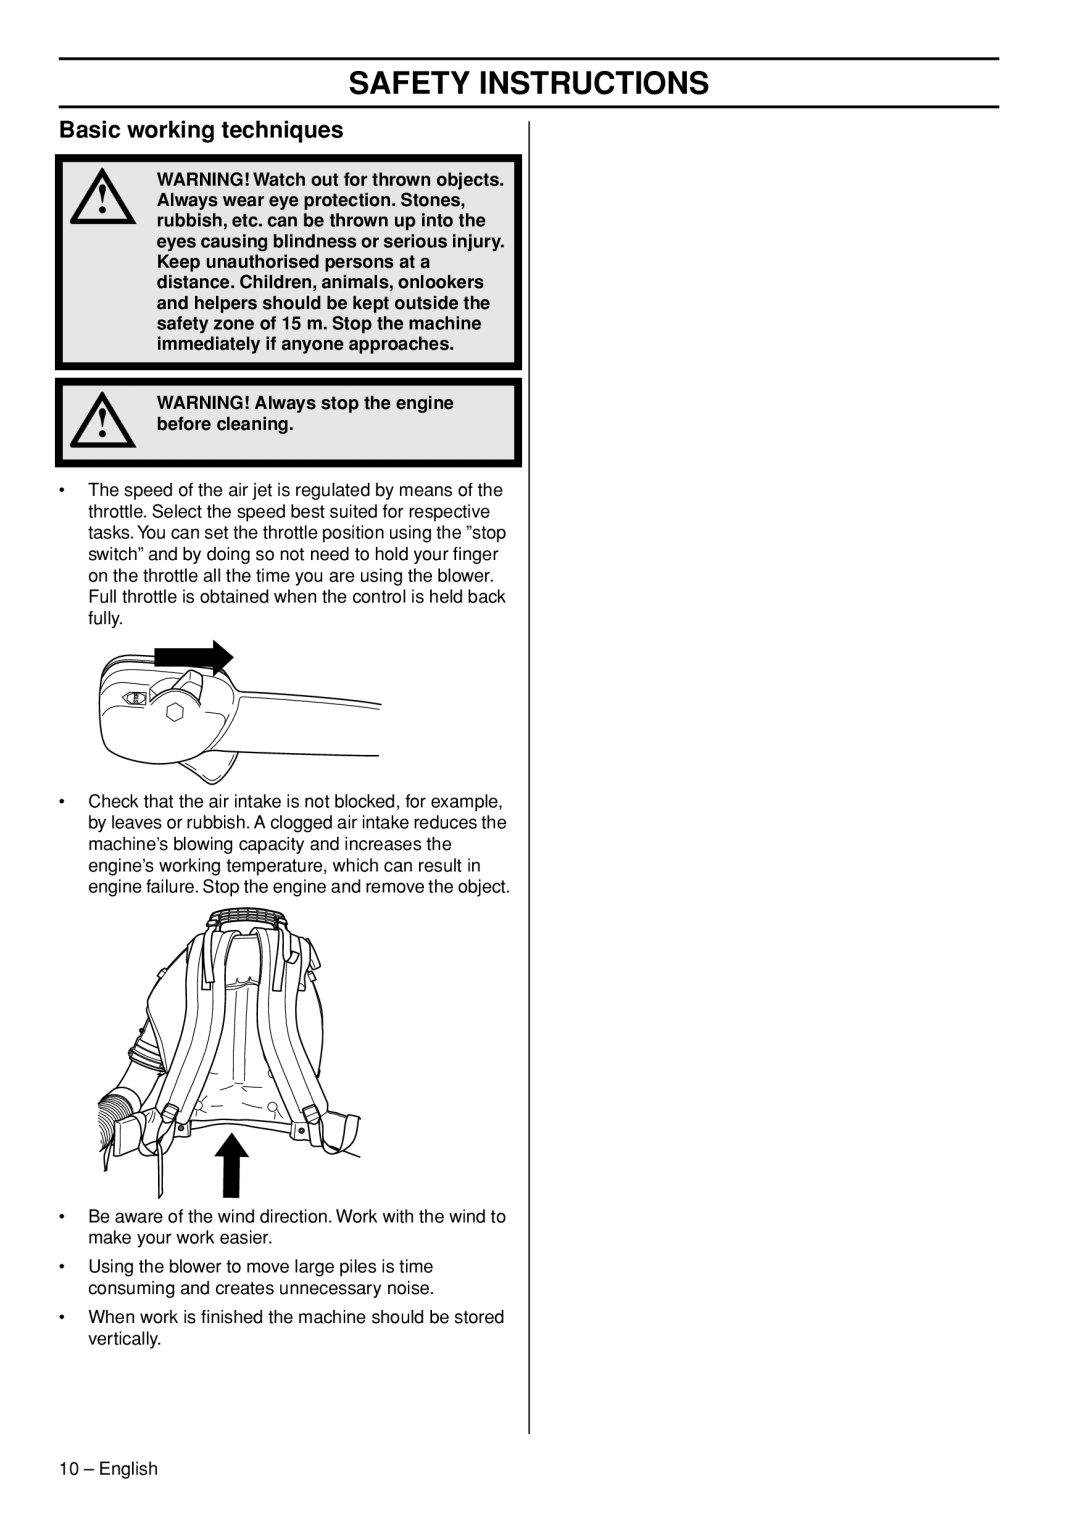 Husqvarna 1153191-26 Basic working techniques, Safety Instructions, WARNING! Watch out for thrown objects, before cleaning 